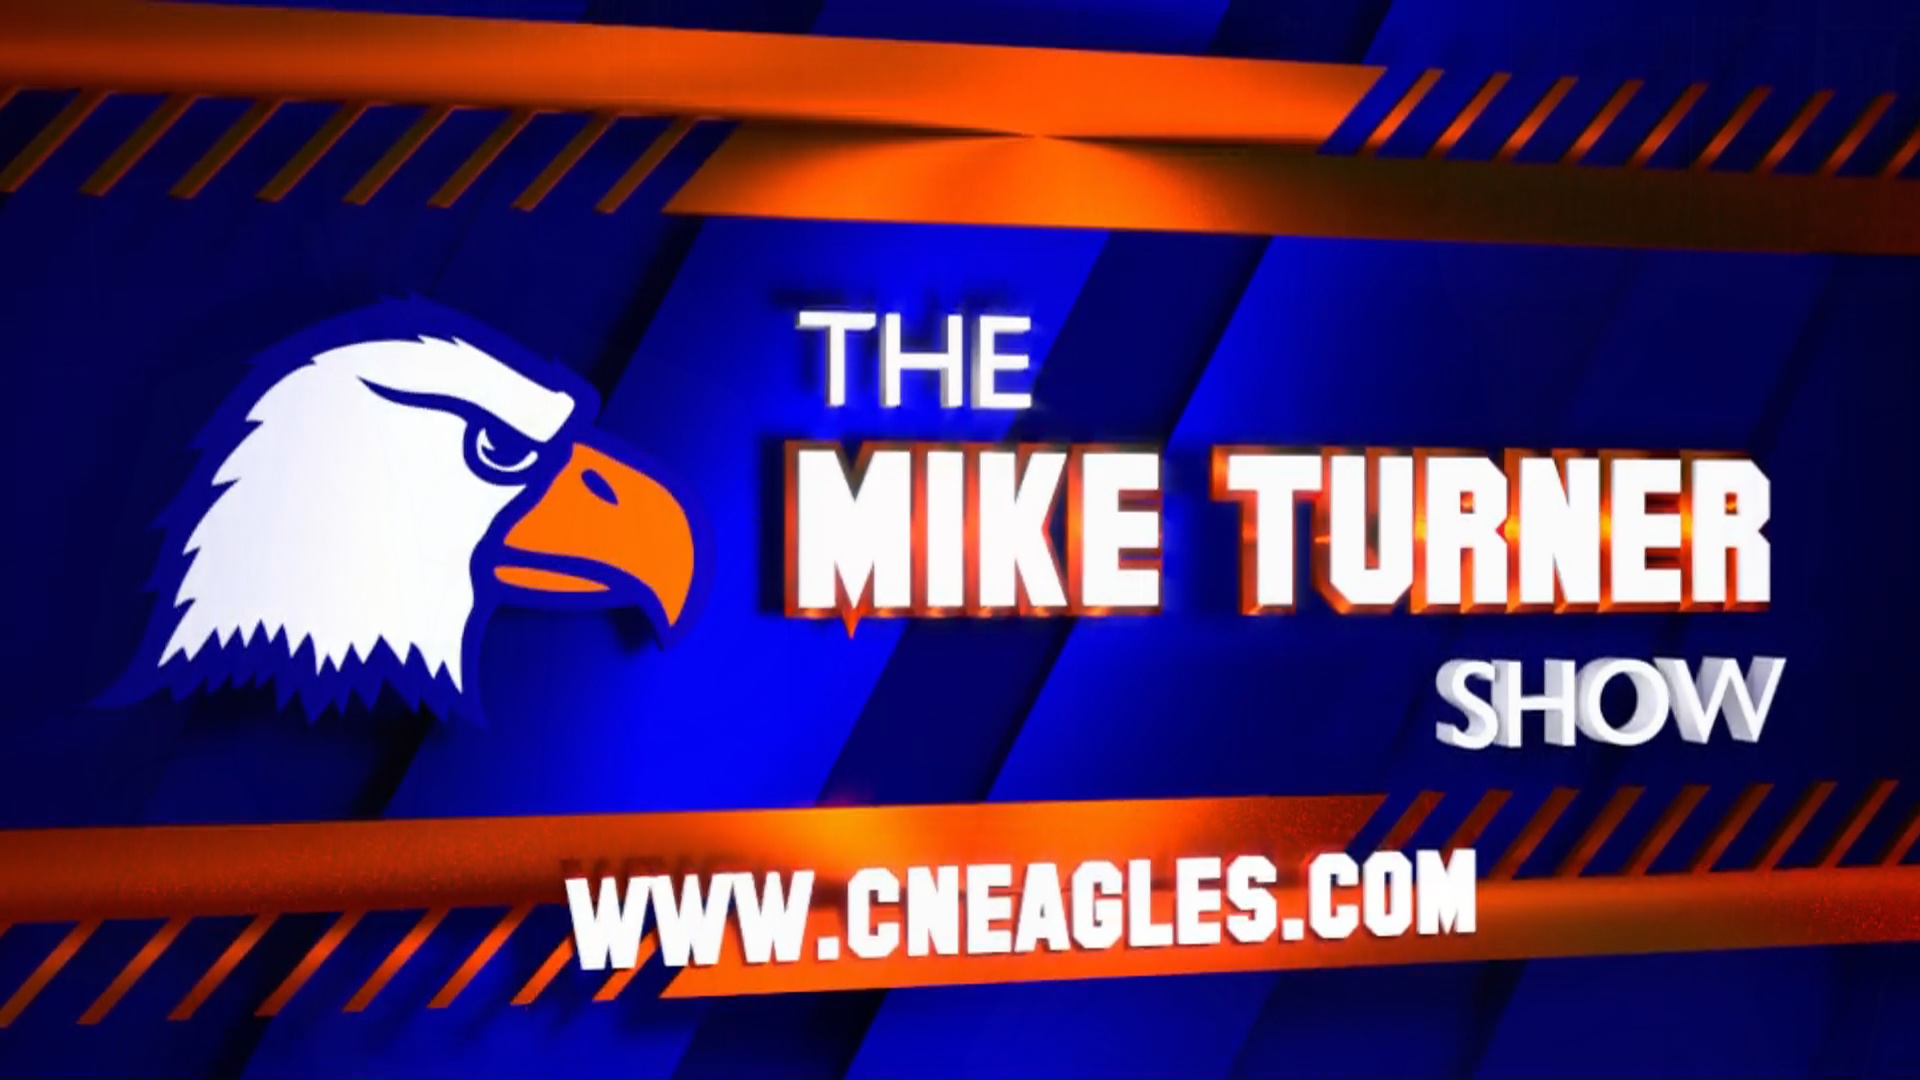 Week one of The Mike Turner Show available online